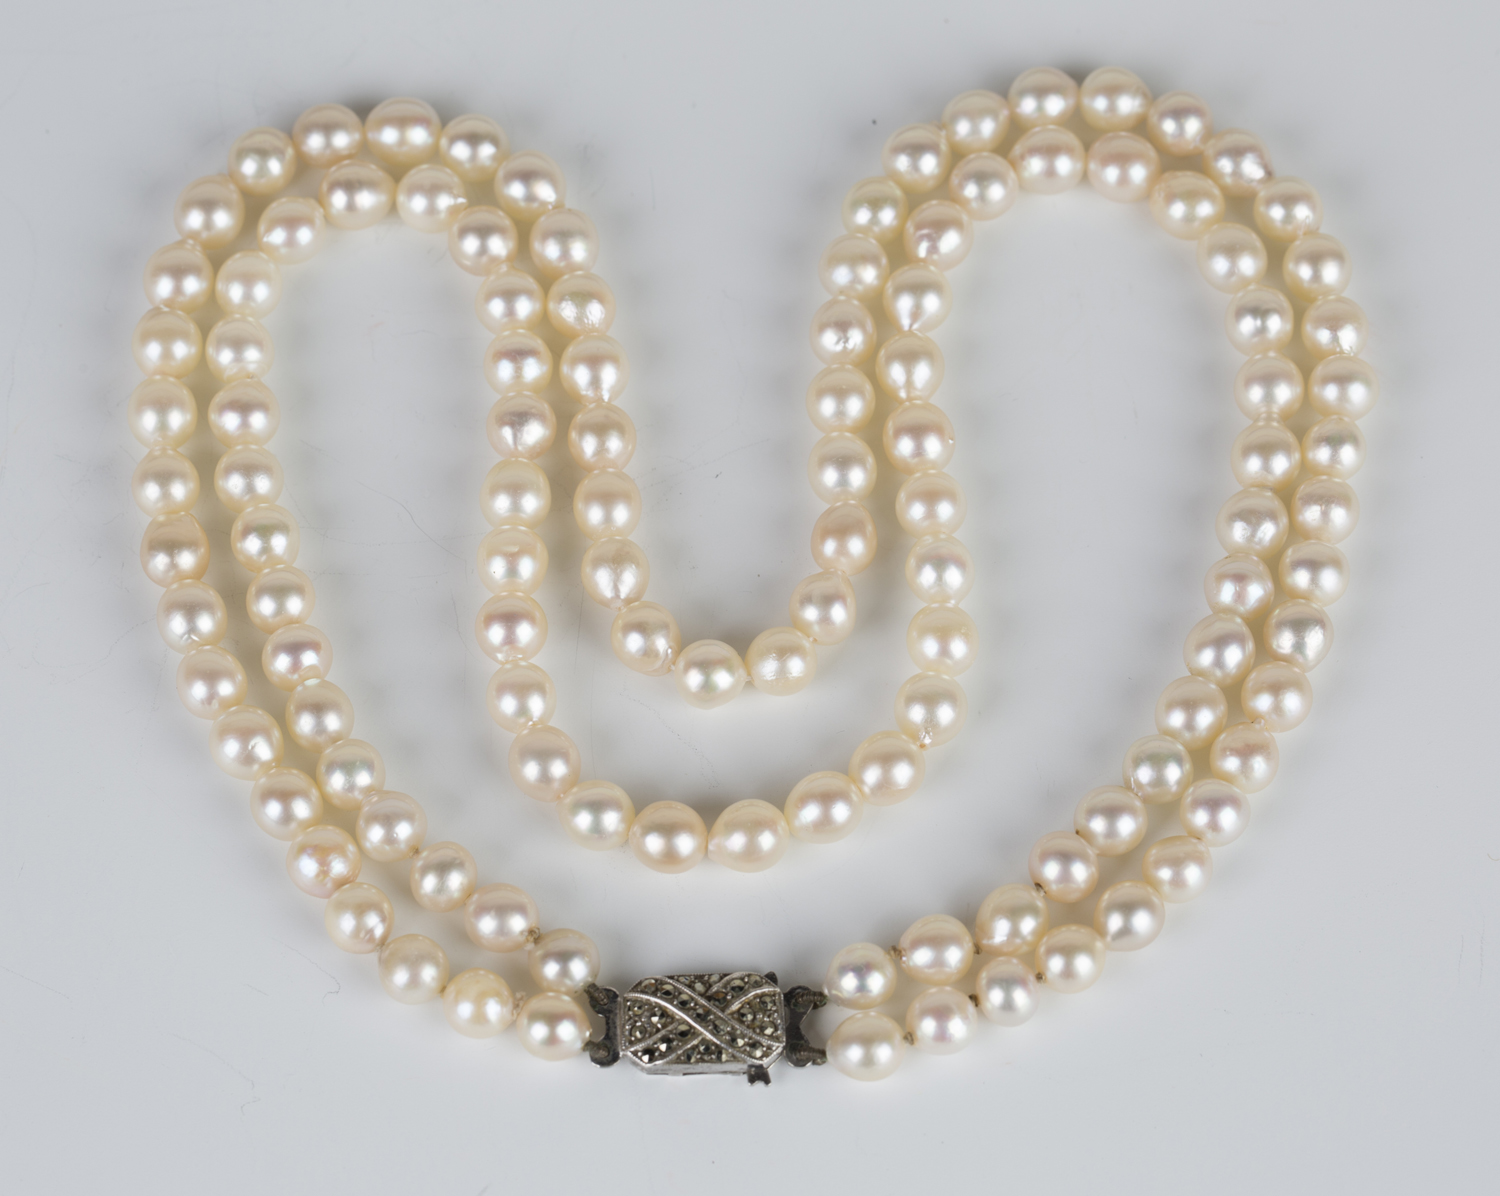 A two row necklace of uniform cultured pearls on a silver and marcasite ...